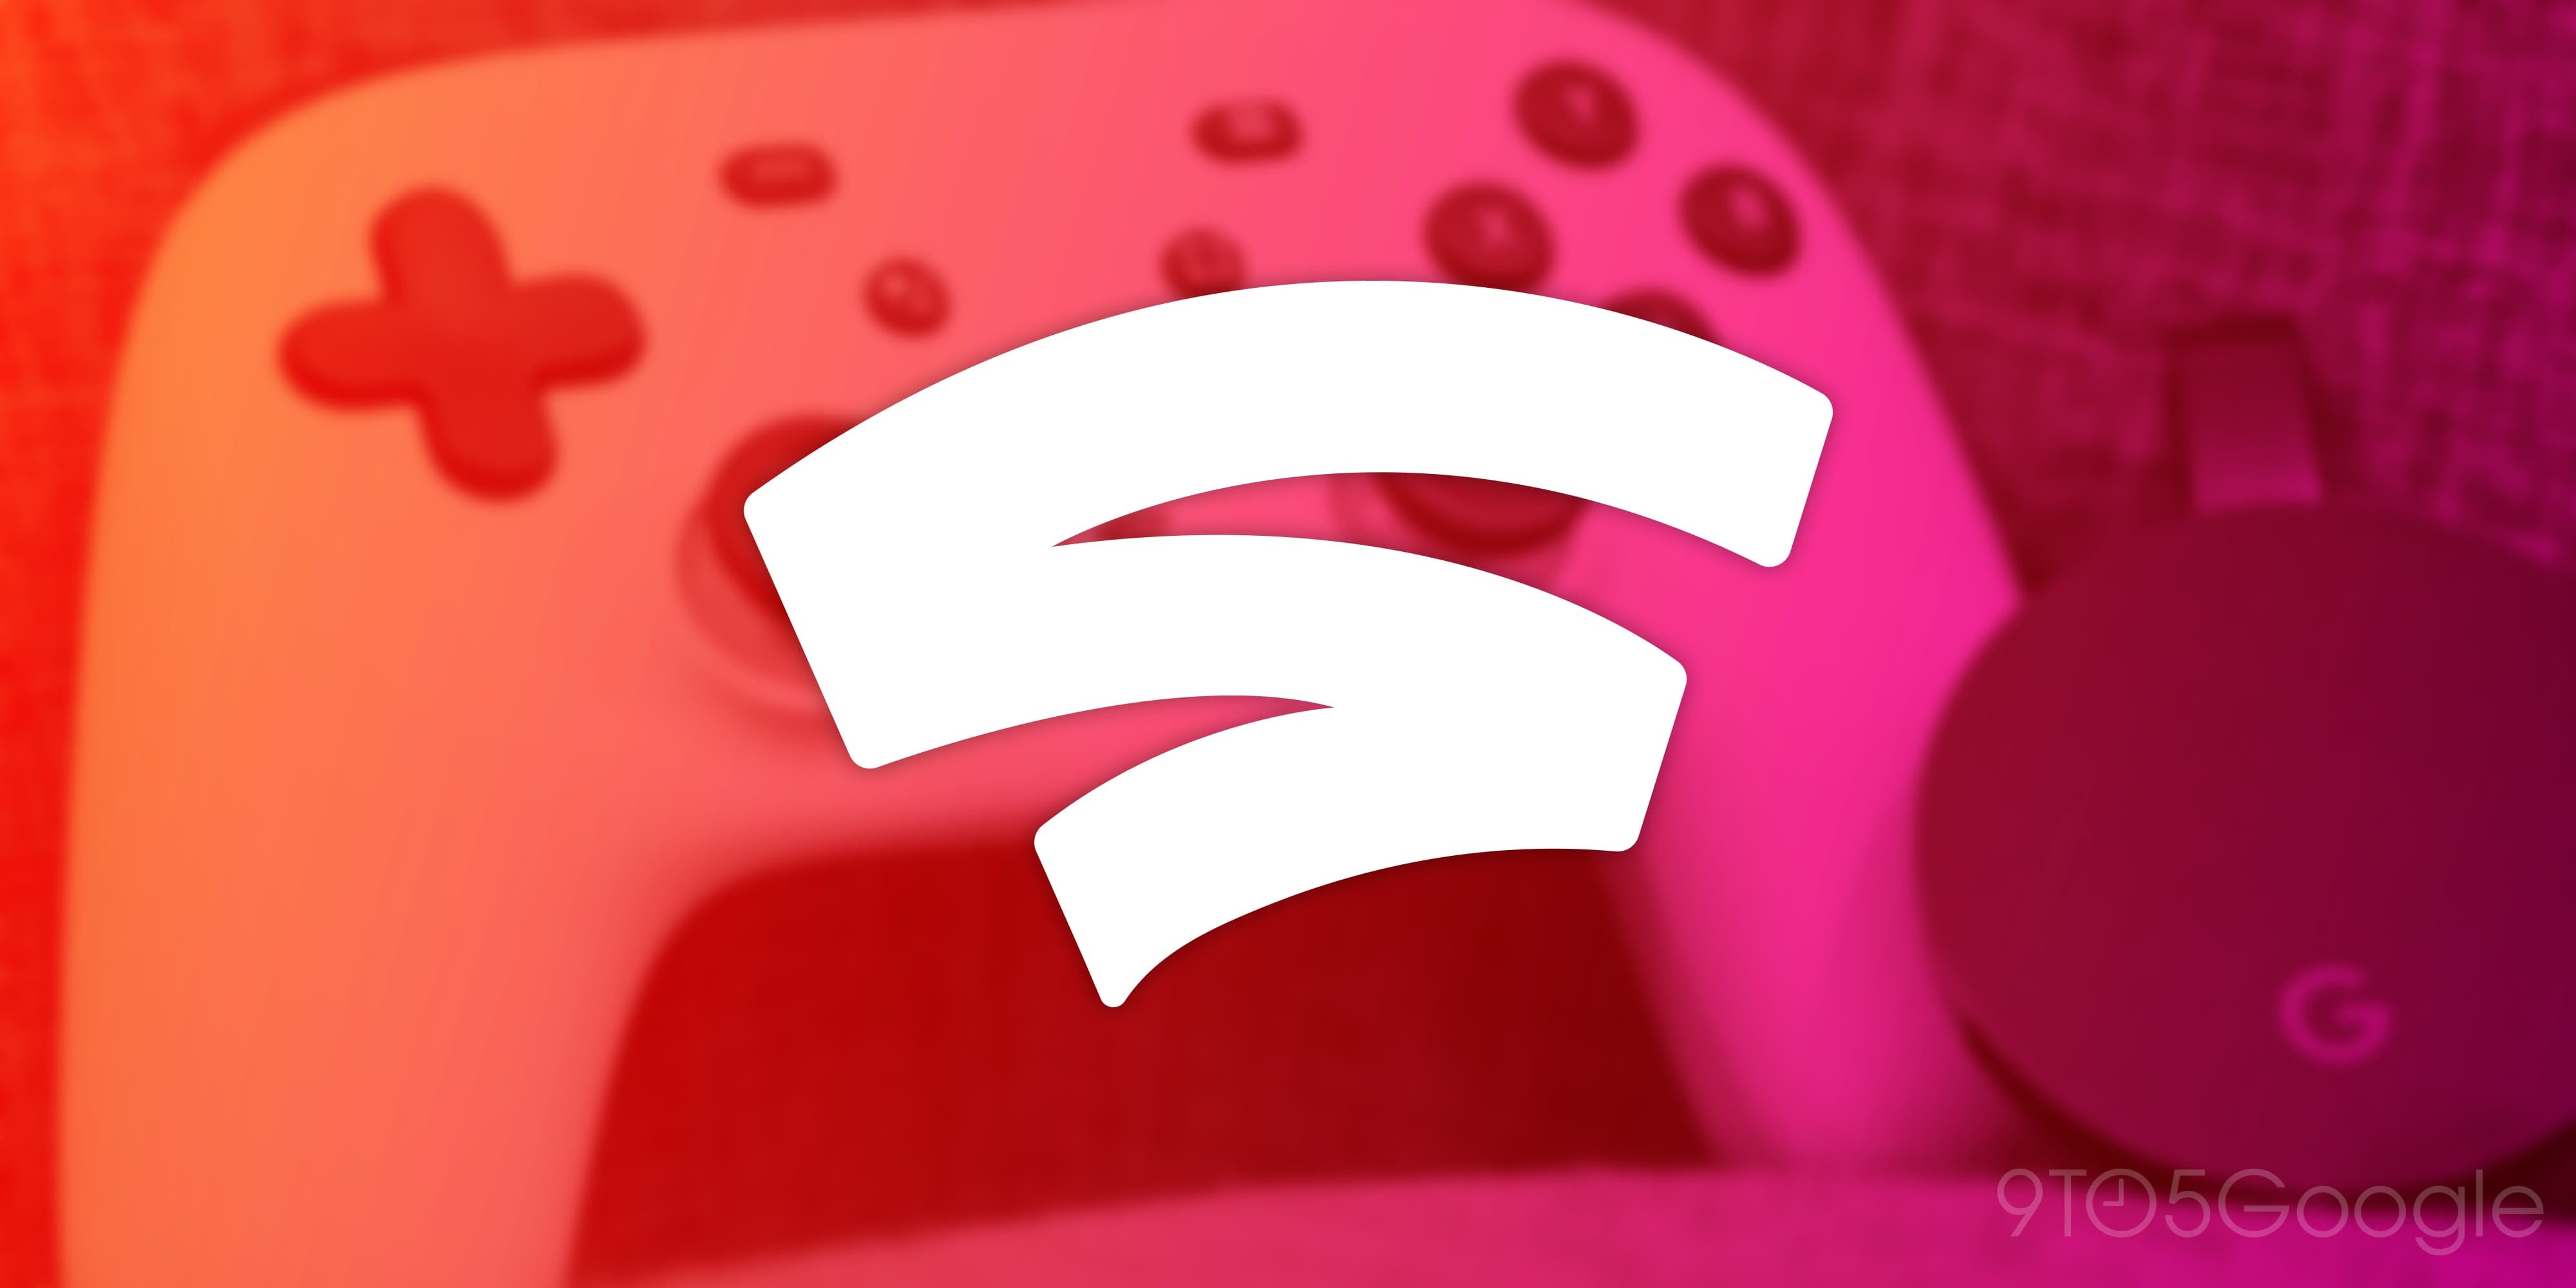 Here are the free games for Stadia Pro in February - Journey to